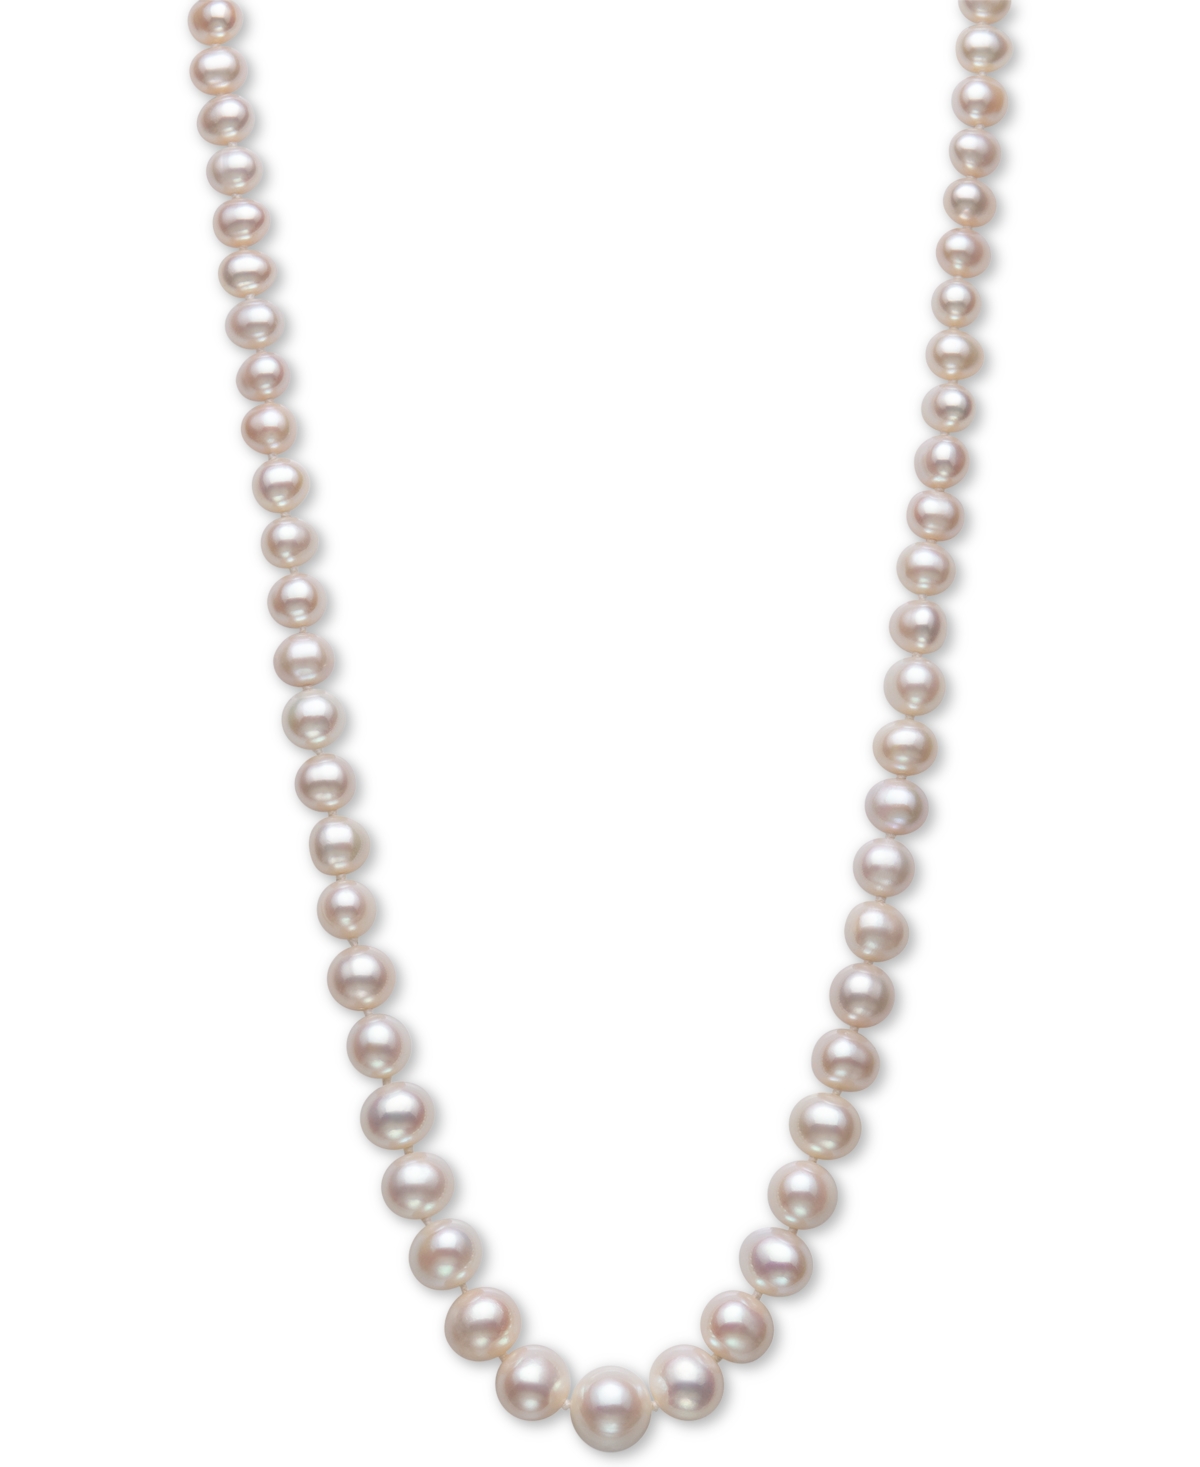 Cultured Freshwater Pearl (5-10mm) Graduated 18" Strand Necklace in 14k Gold, Created for Macy's - White